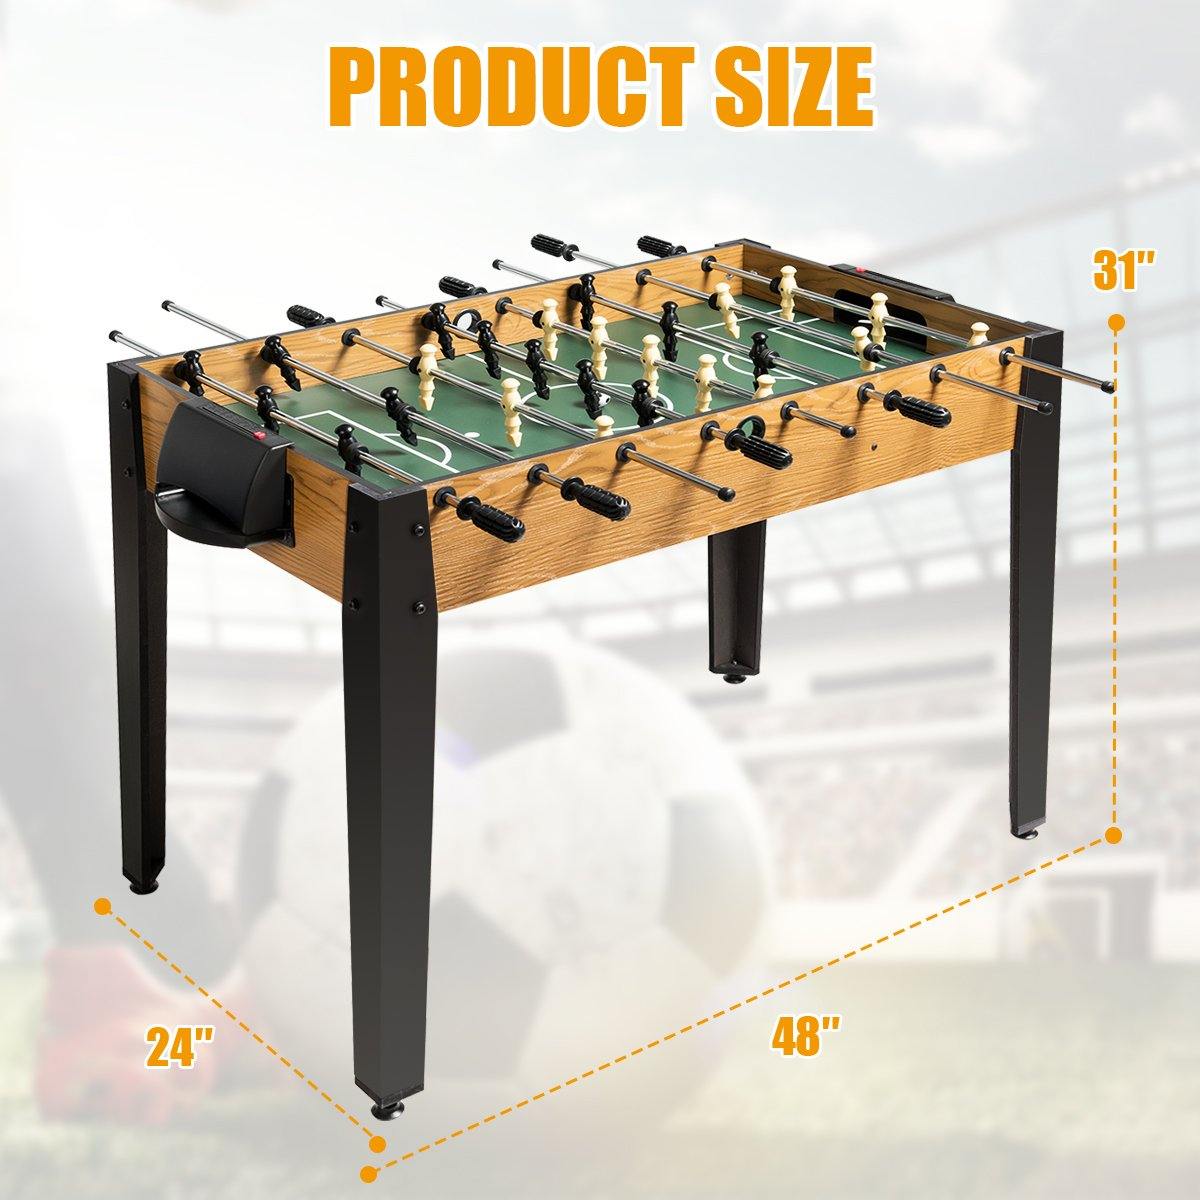 Giantex Foosball Table, Wooden Soccer Table Game w/ Footballs, Suit for 4 Players (48 inch) - Giantexus